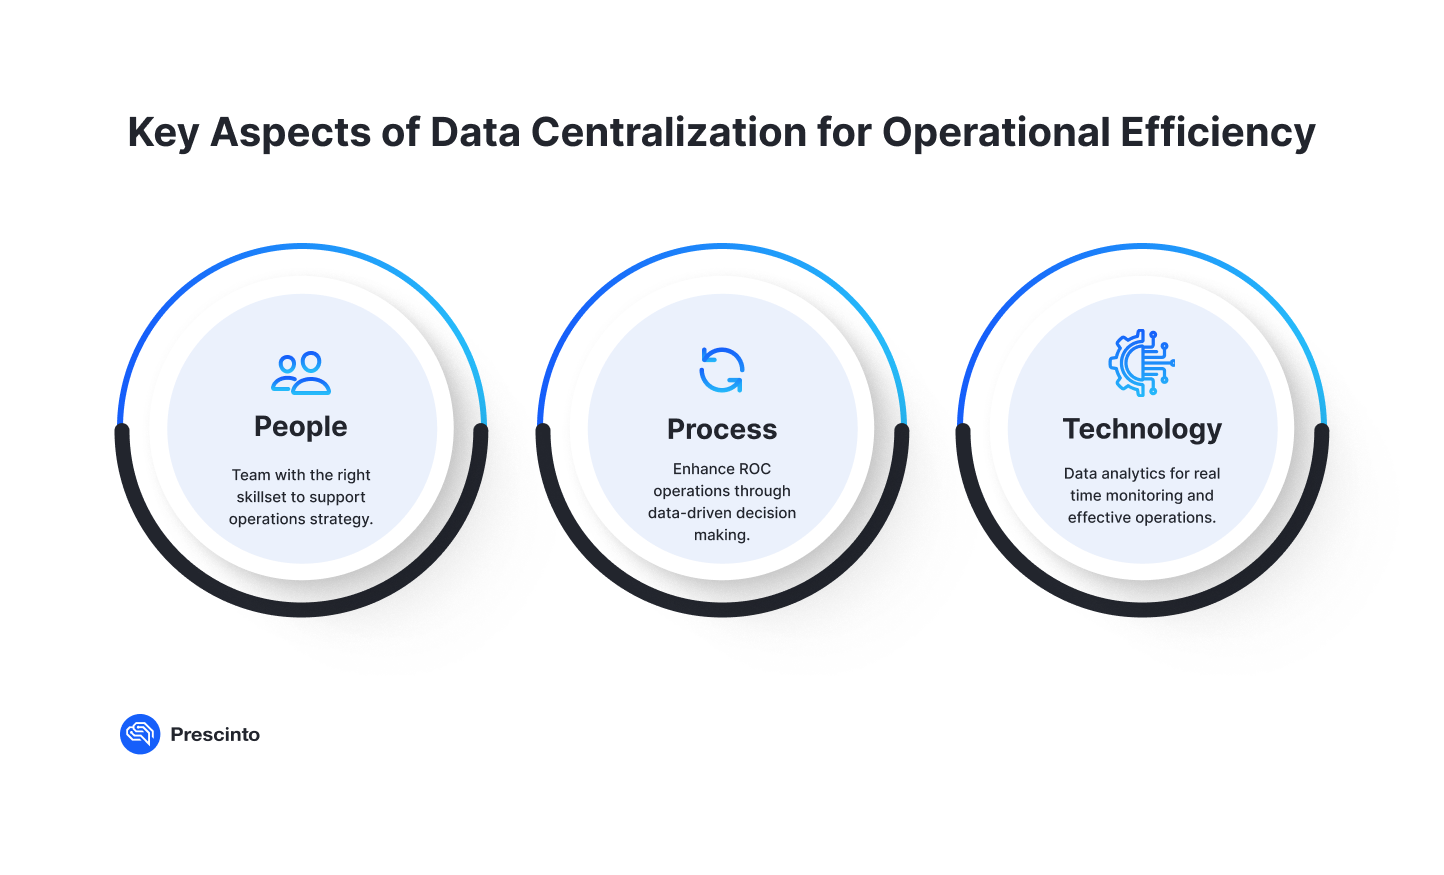 Key Aspects of Data Centralization for Operational Efficiency